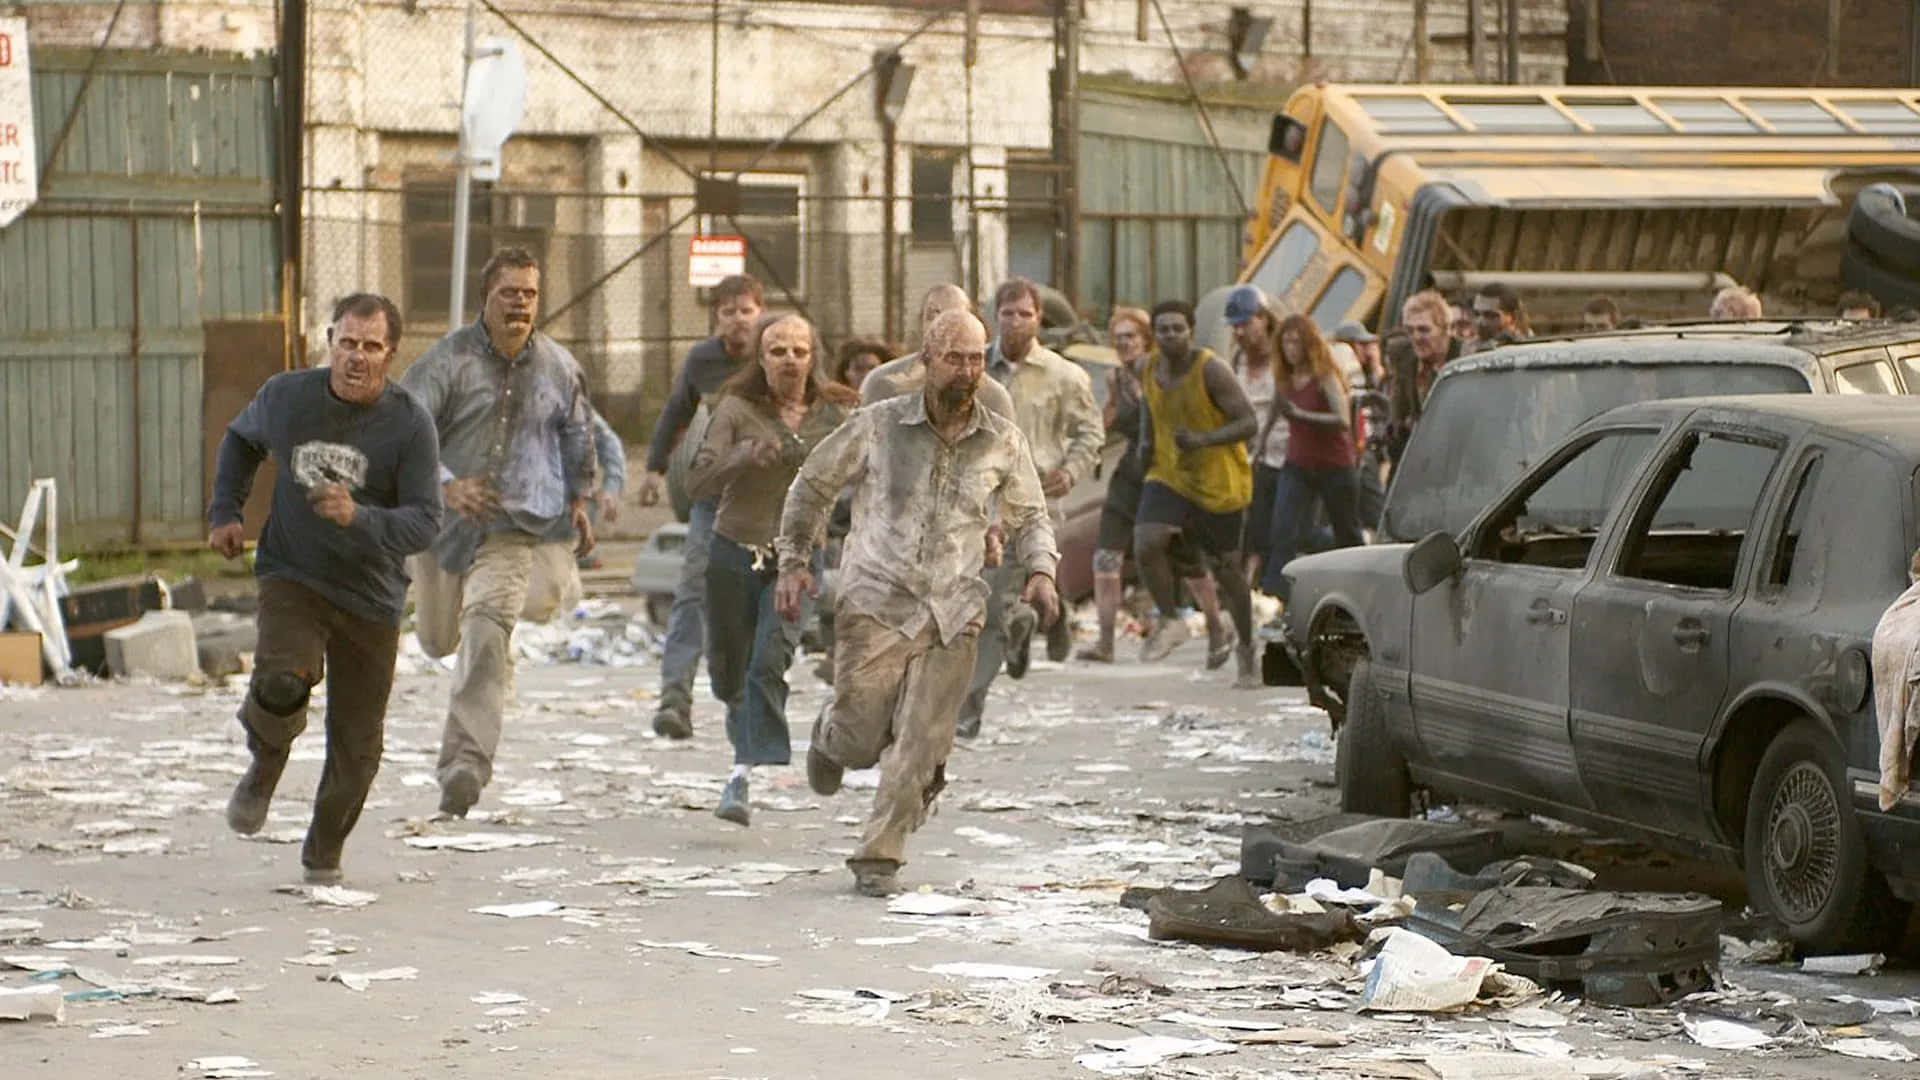 the walking dead season 3 - a group of people running through a city